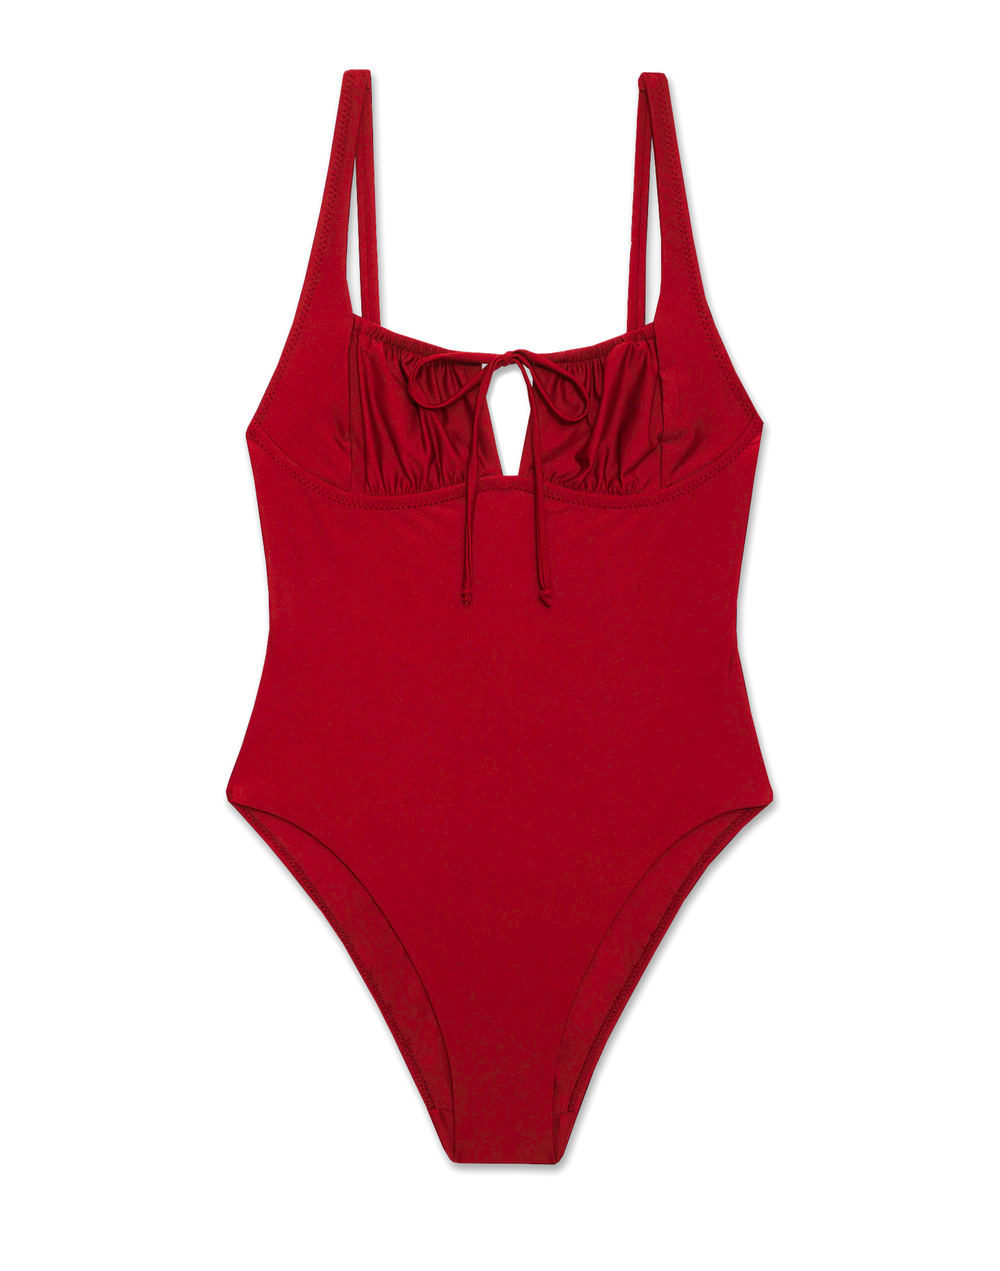 Chemise One Piece in Scarlet